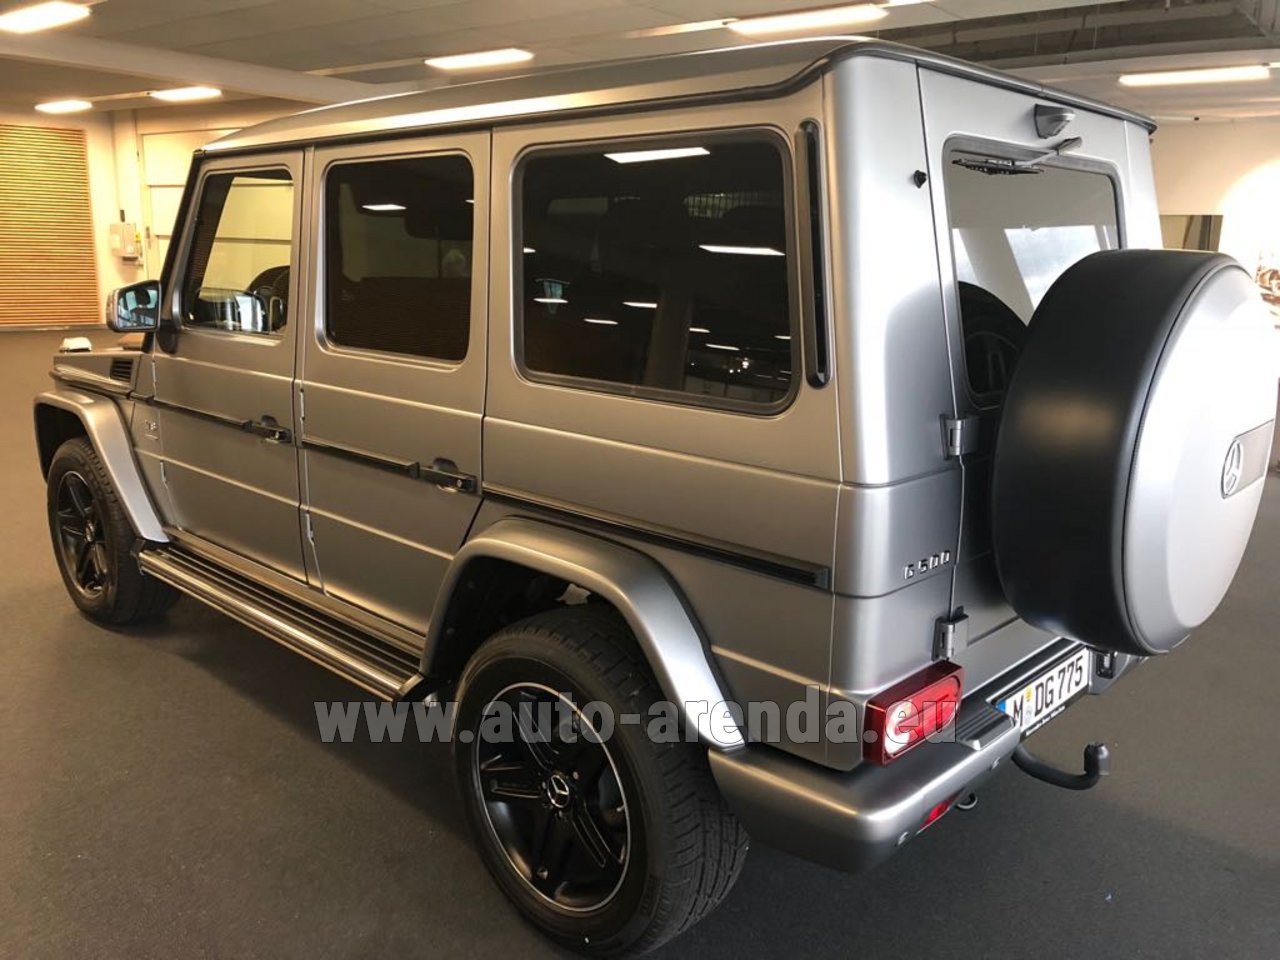 Rent The Mercedes Benz G Class G 500 Limited Edition Car In Hamburg